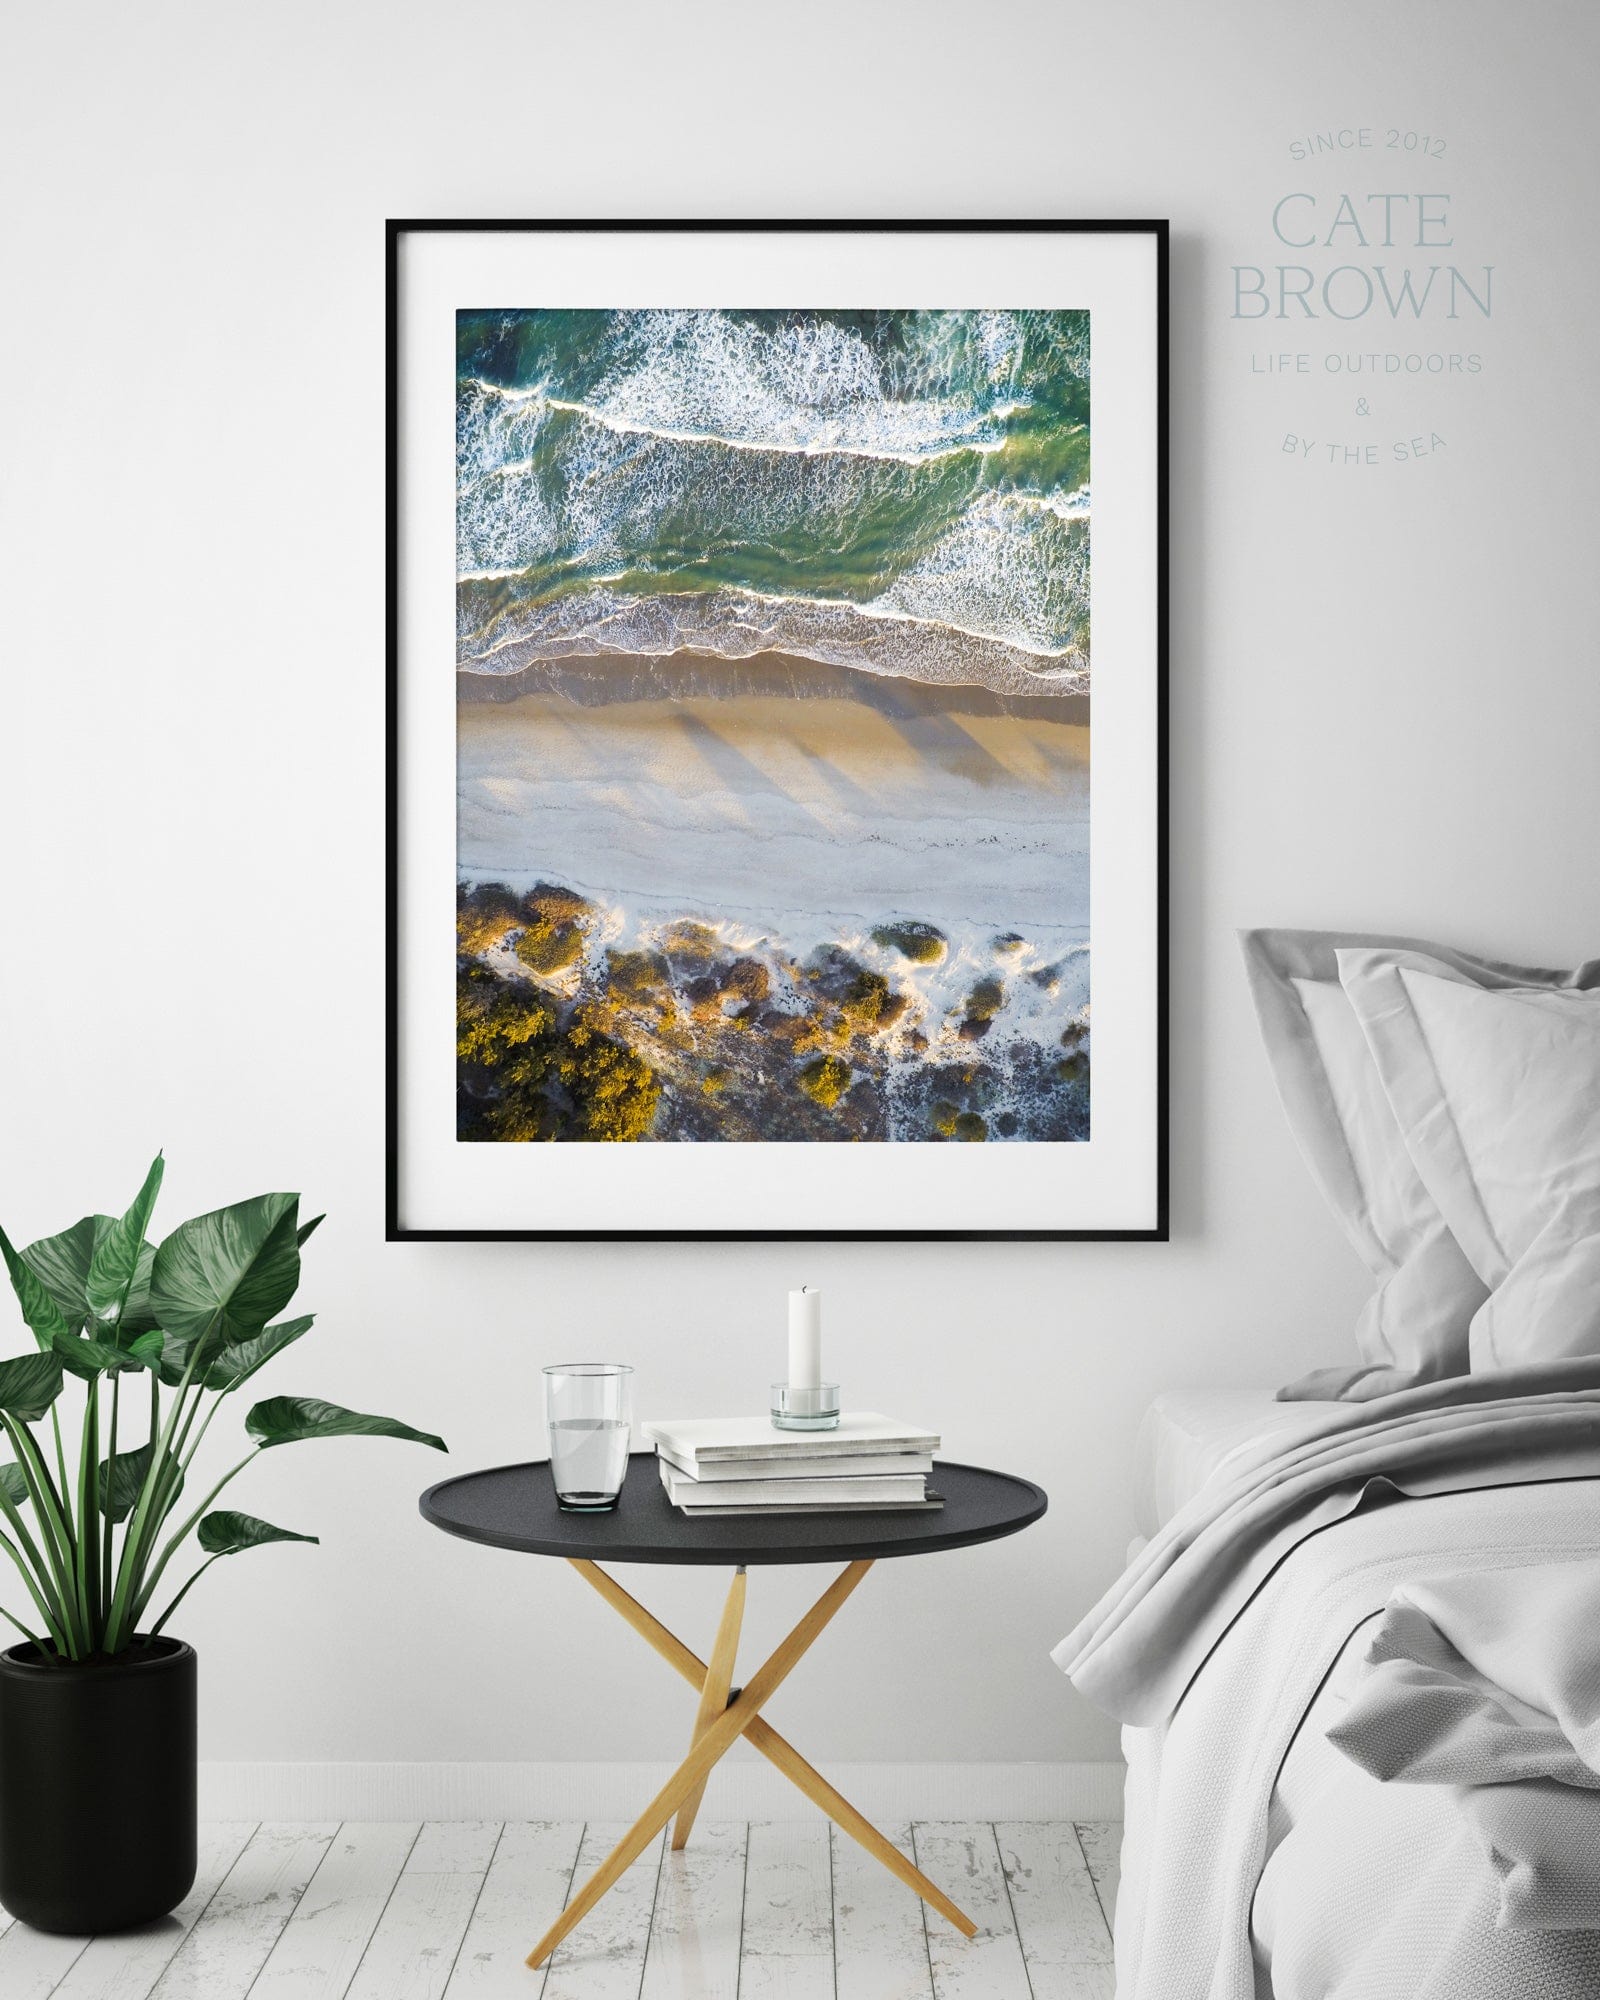 Cate Brown Photo Fine Art Print / 8"x12" / None (Print Only) Narragansett #1  //  Aerial Photography Made to Order Ocean Fine Art